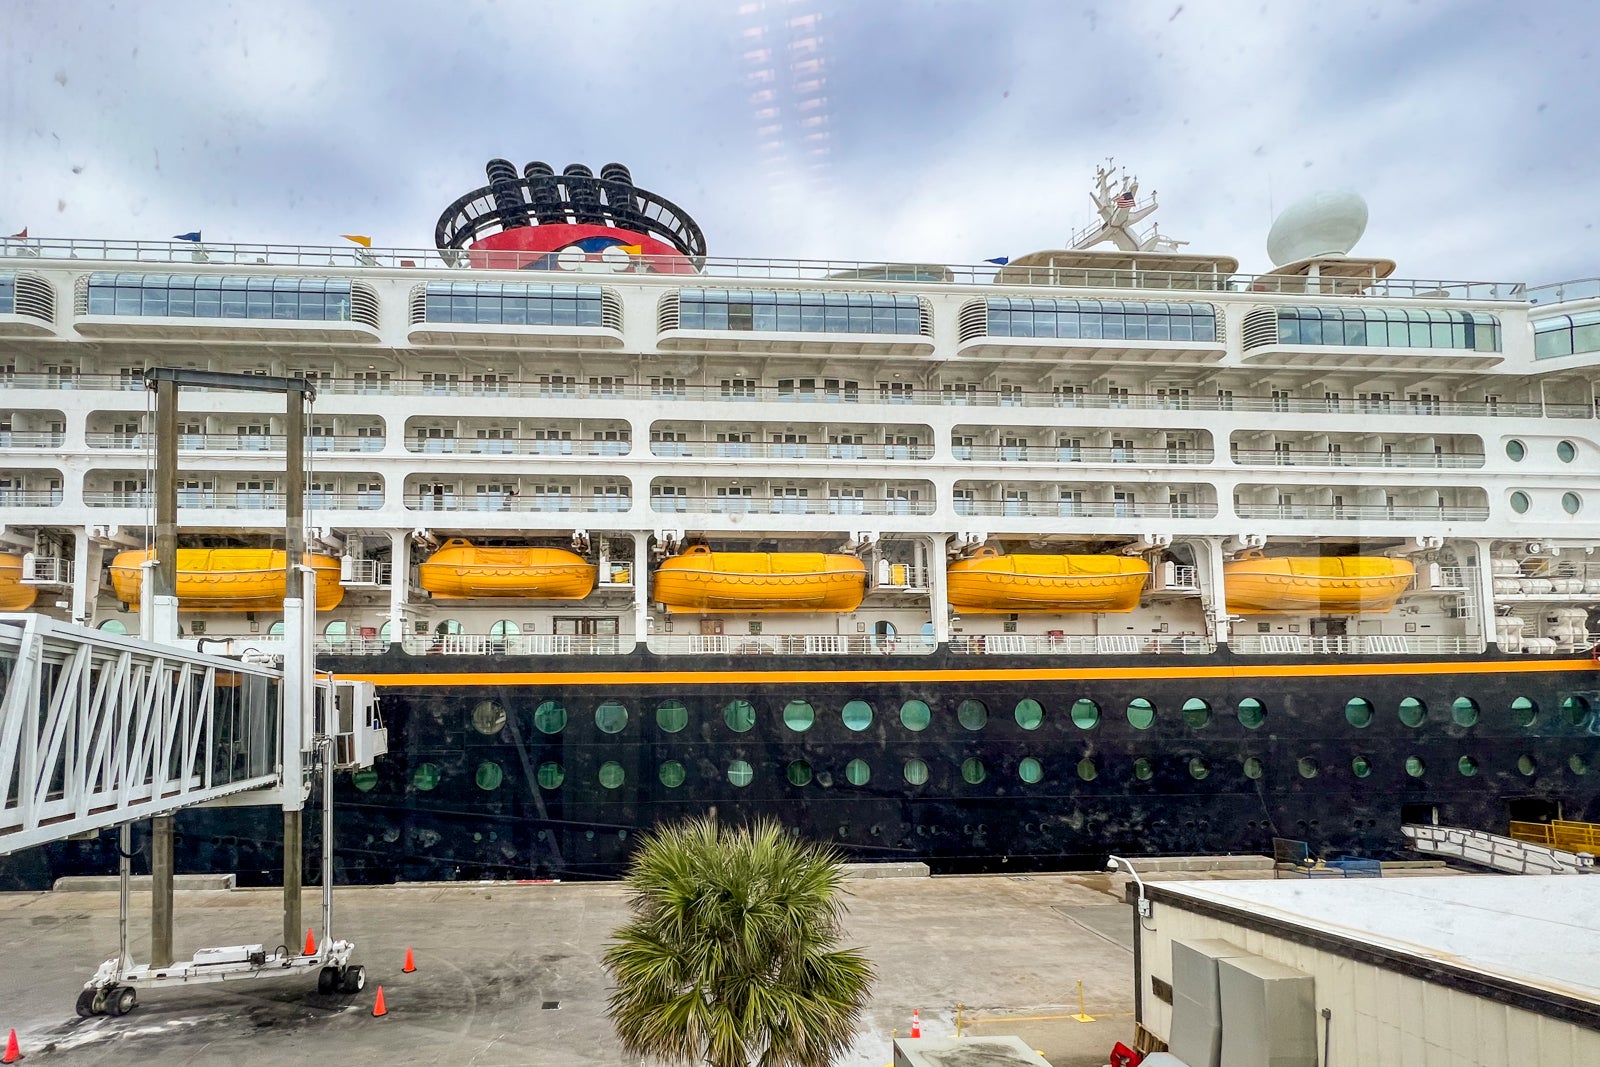 disney cruise new orleans to cozumel